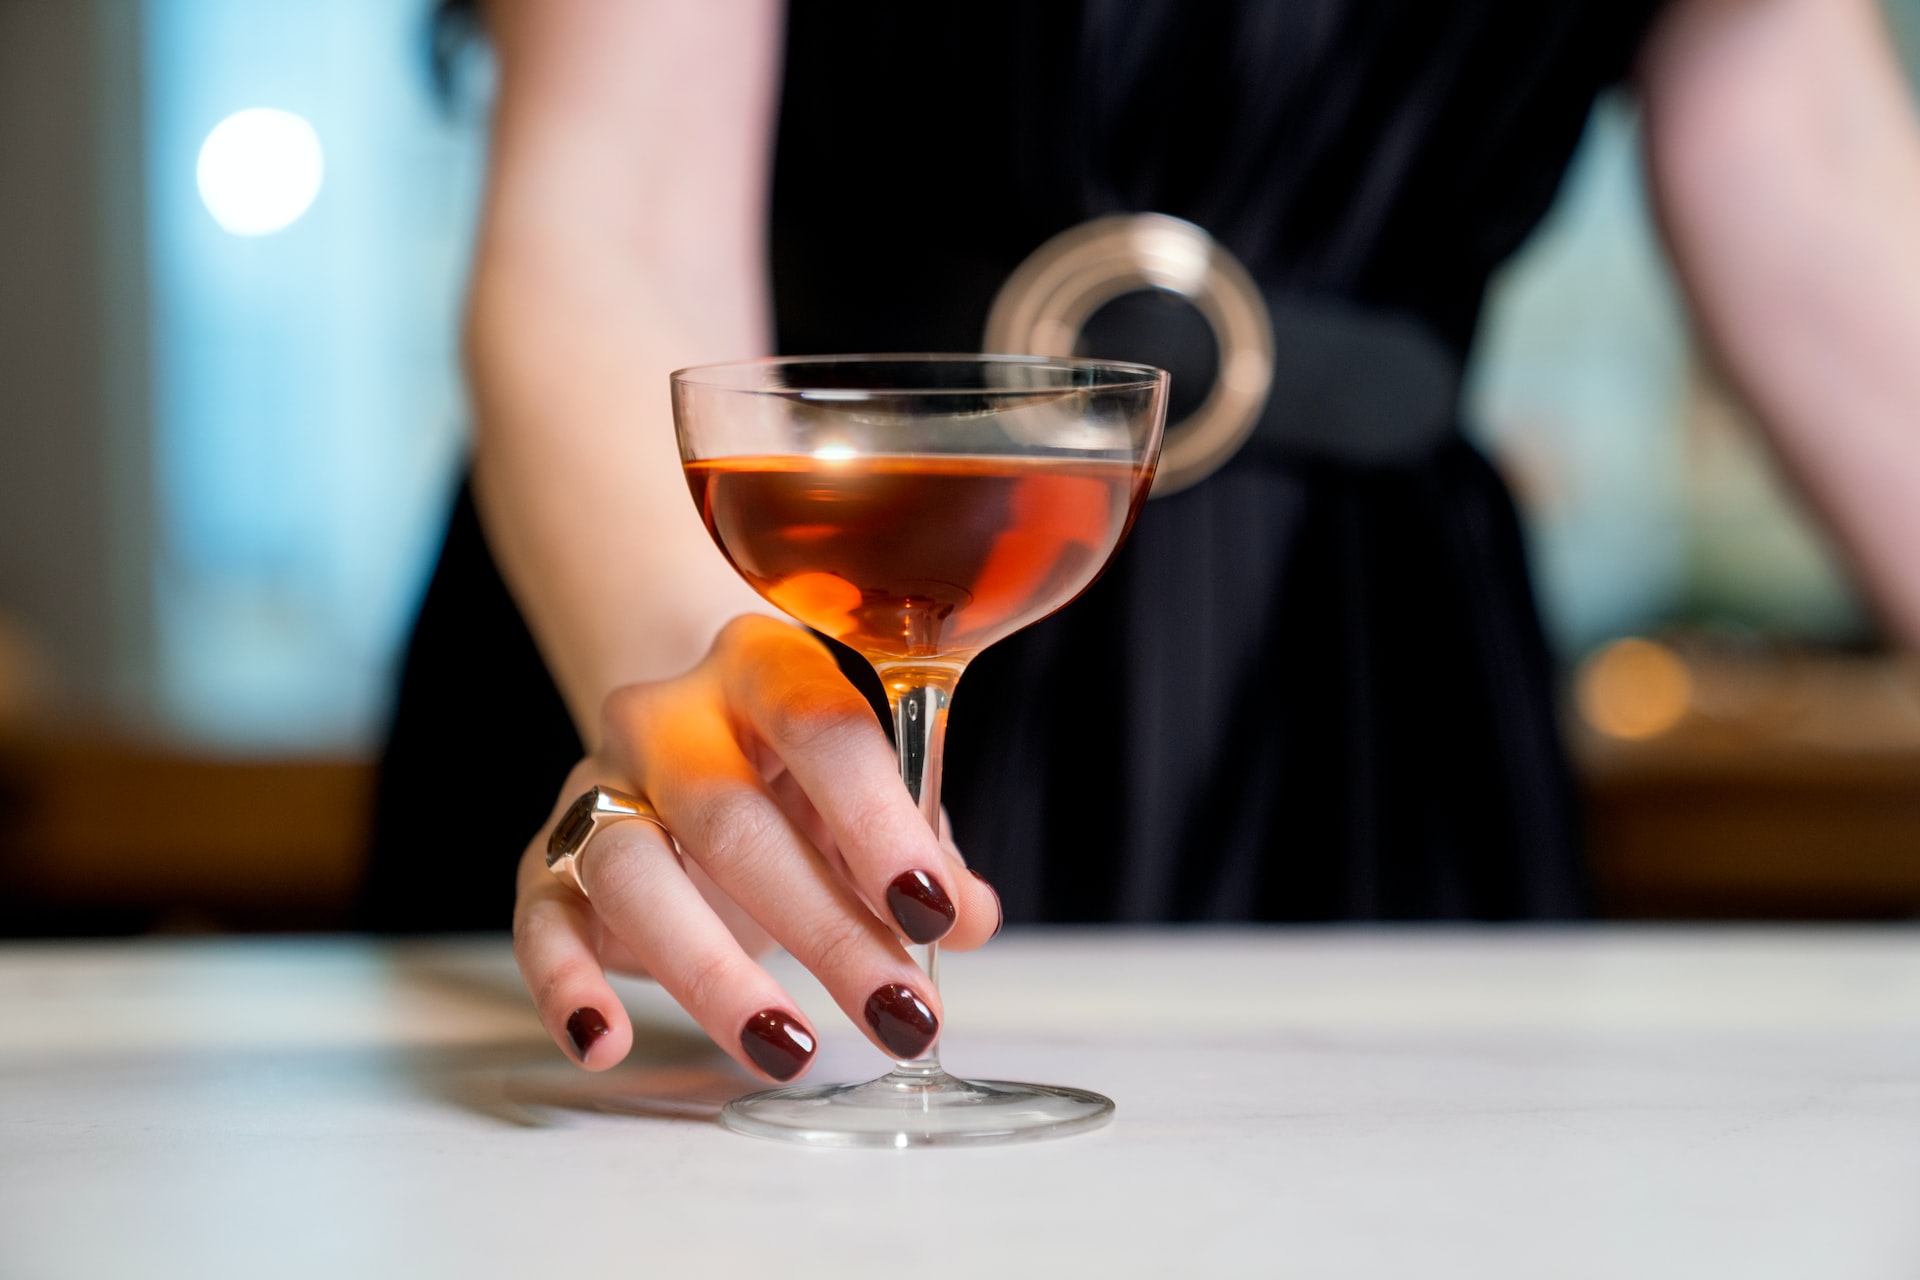 a woman's hand holding a wine glass with a drink in it